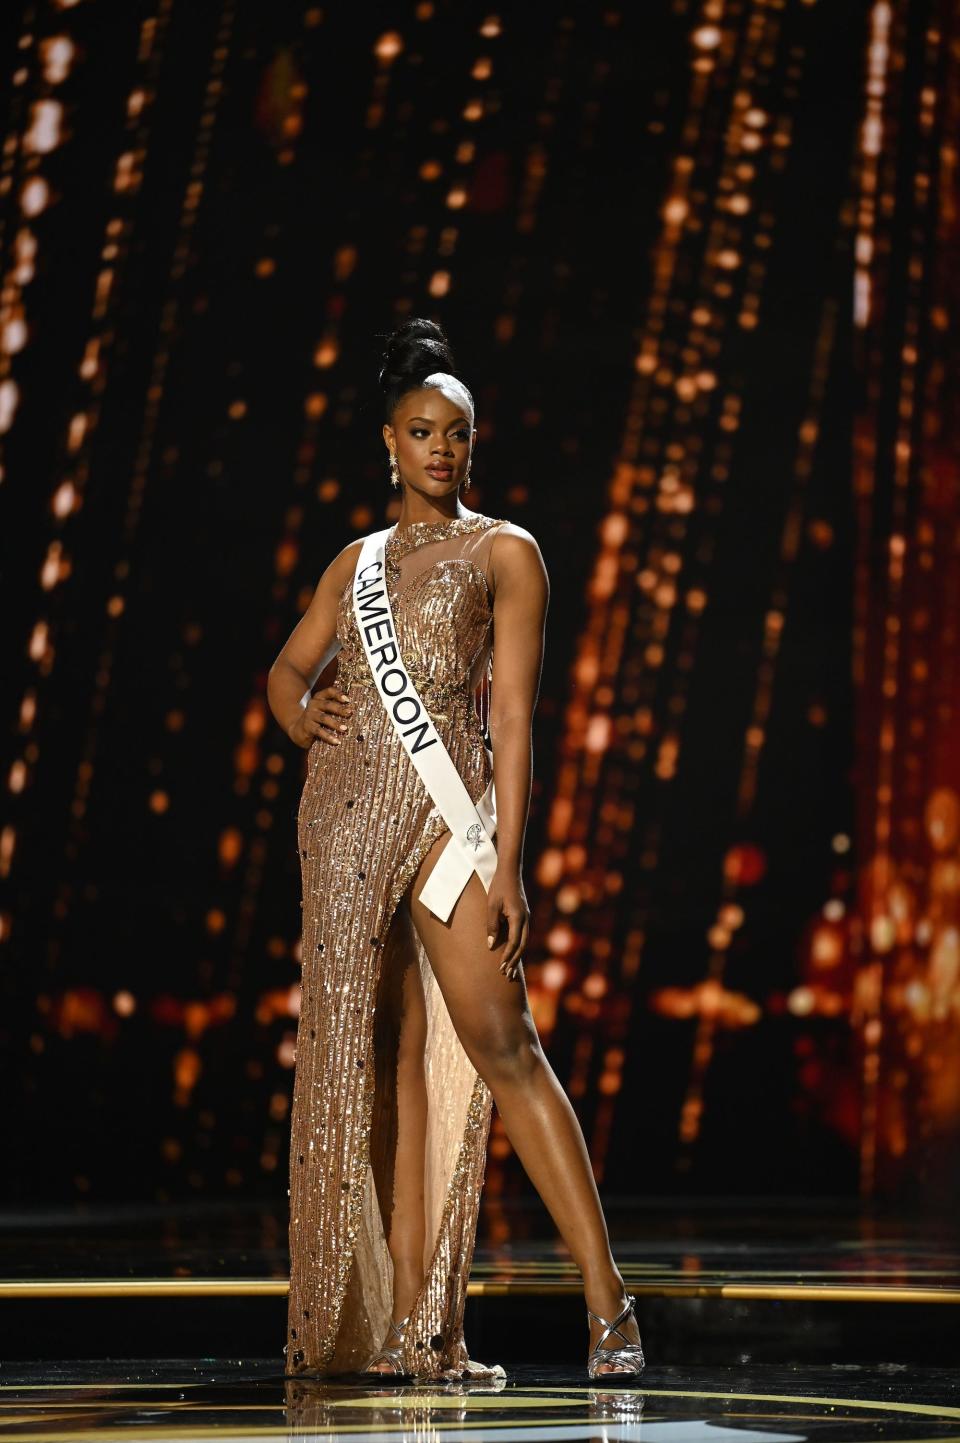 Miss Cameroon competes in the 71st annual Miss Universe pageant.